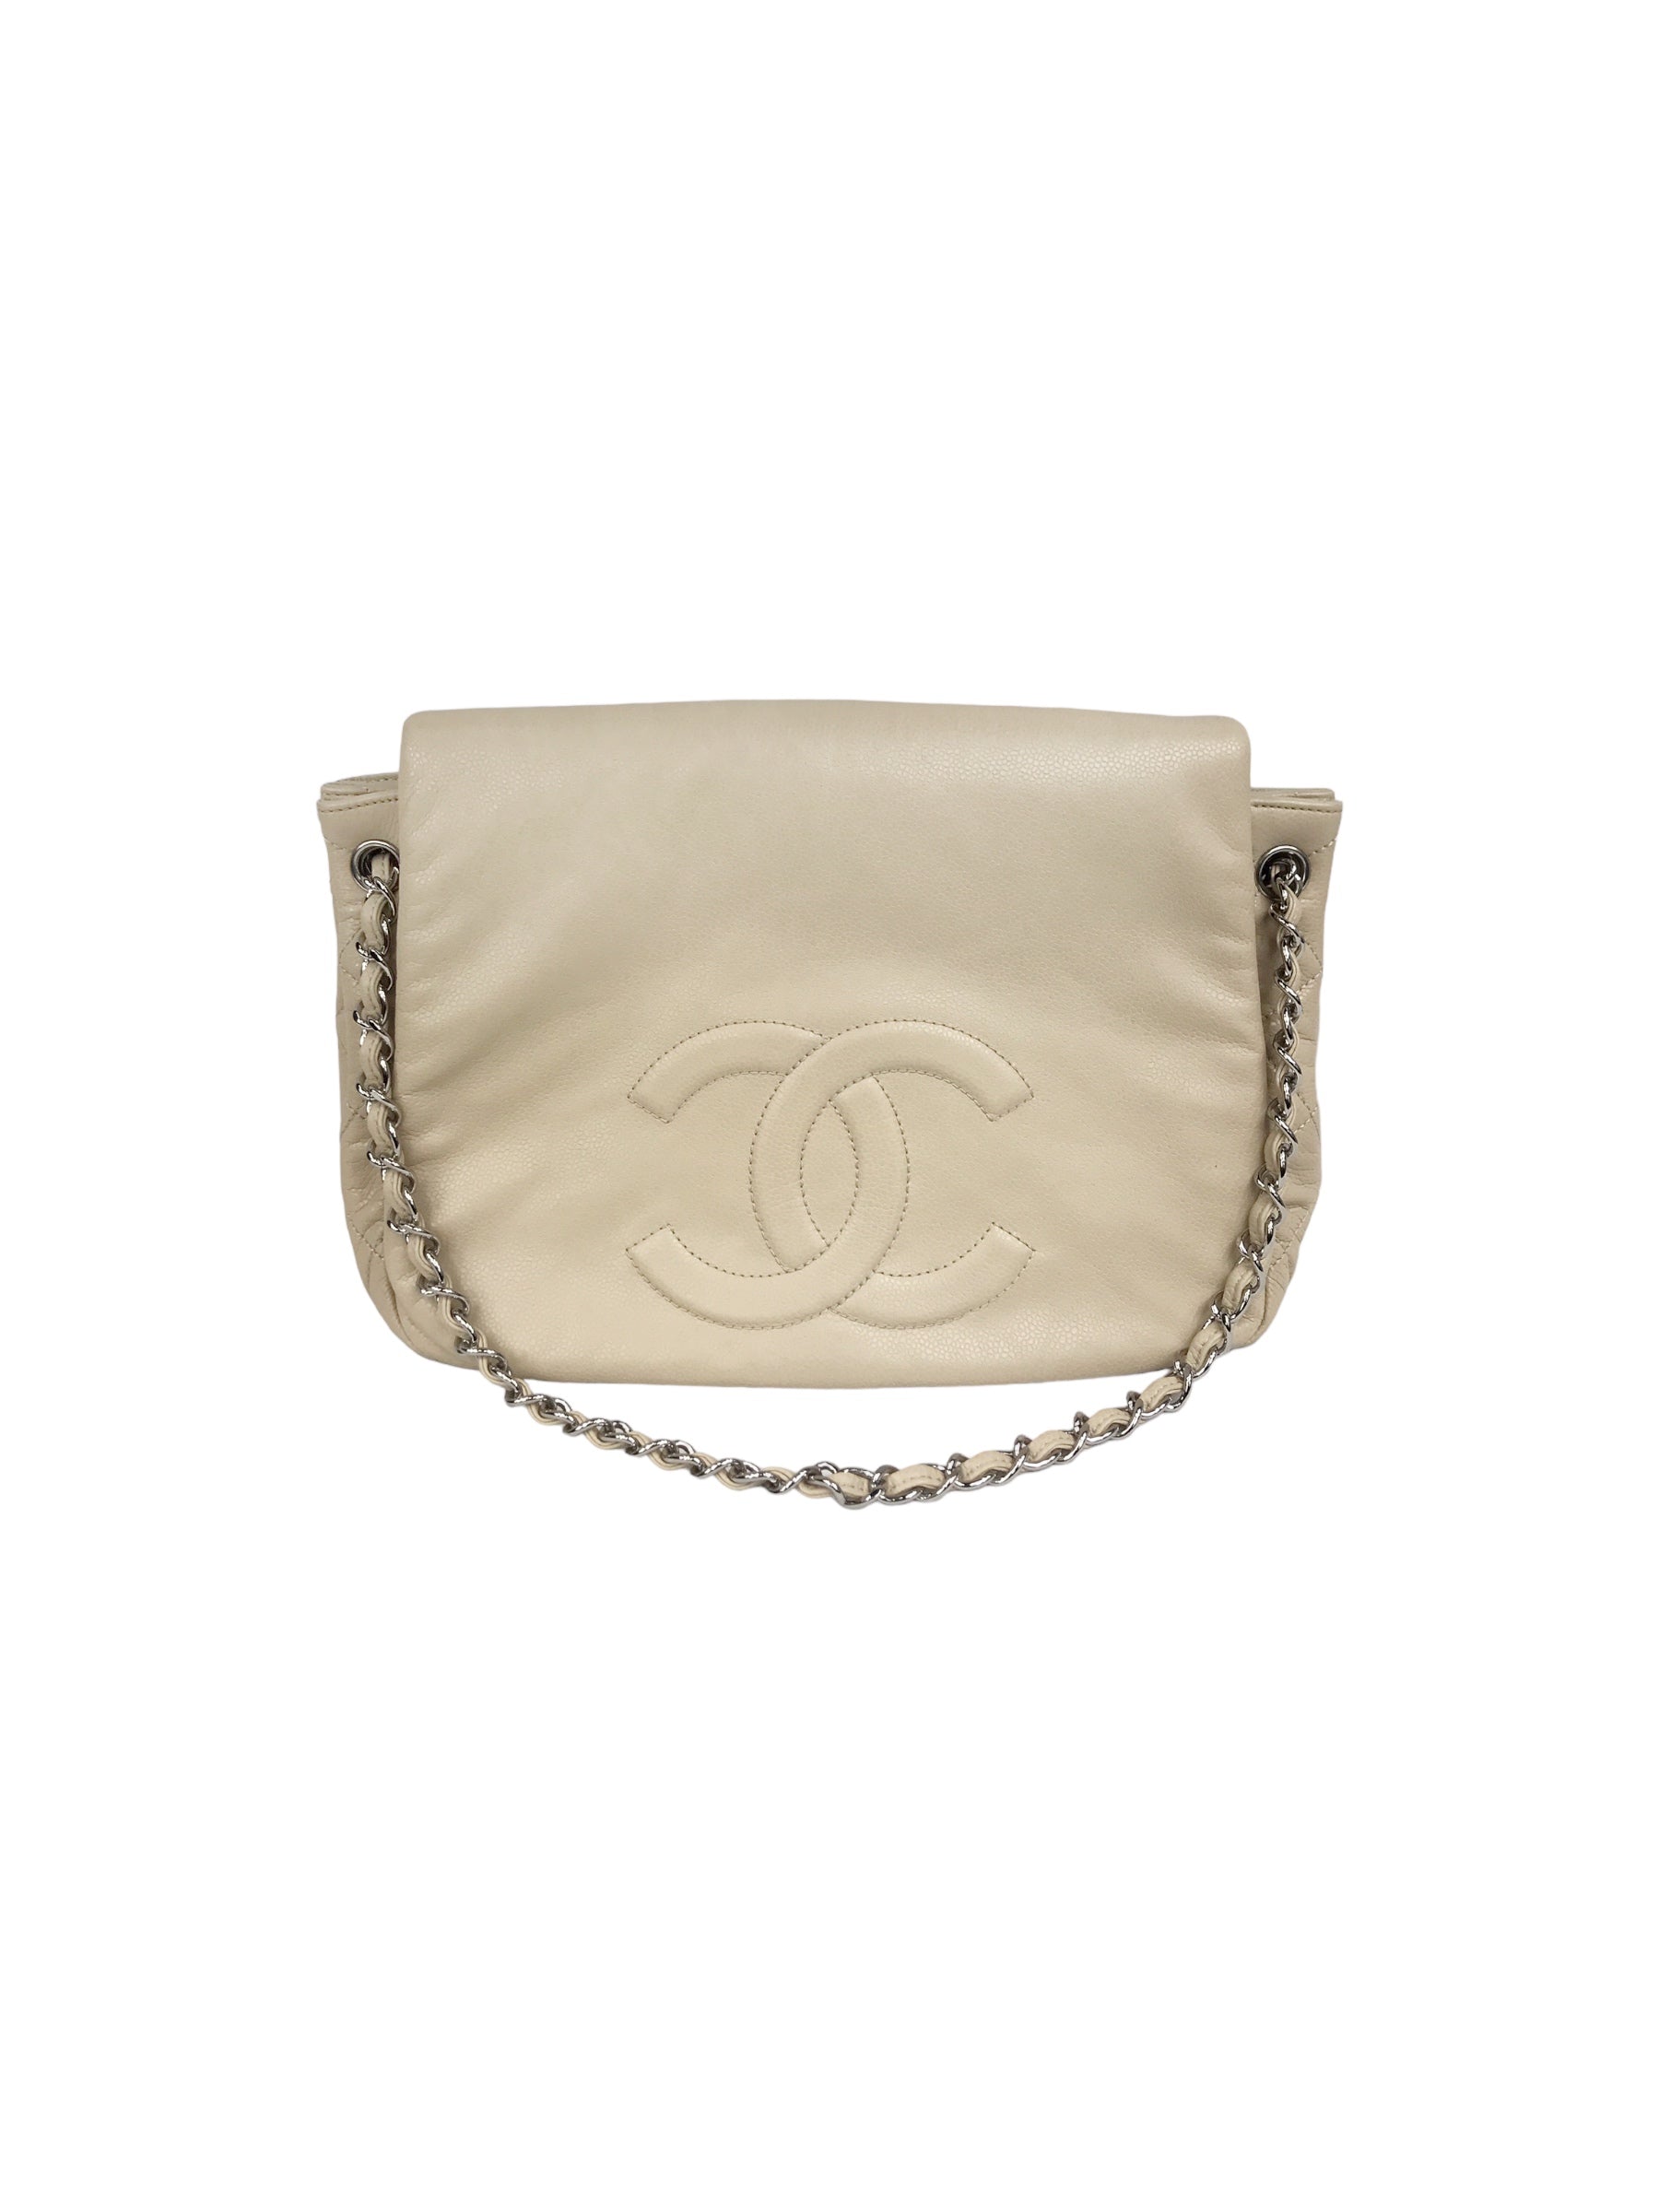 CHANEL, Bags, Chanel 255 Reissue Woc Burgundy Dark Red Leather Crossbody  Bag Wallet On Chain